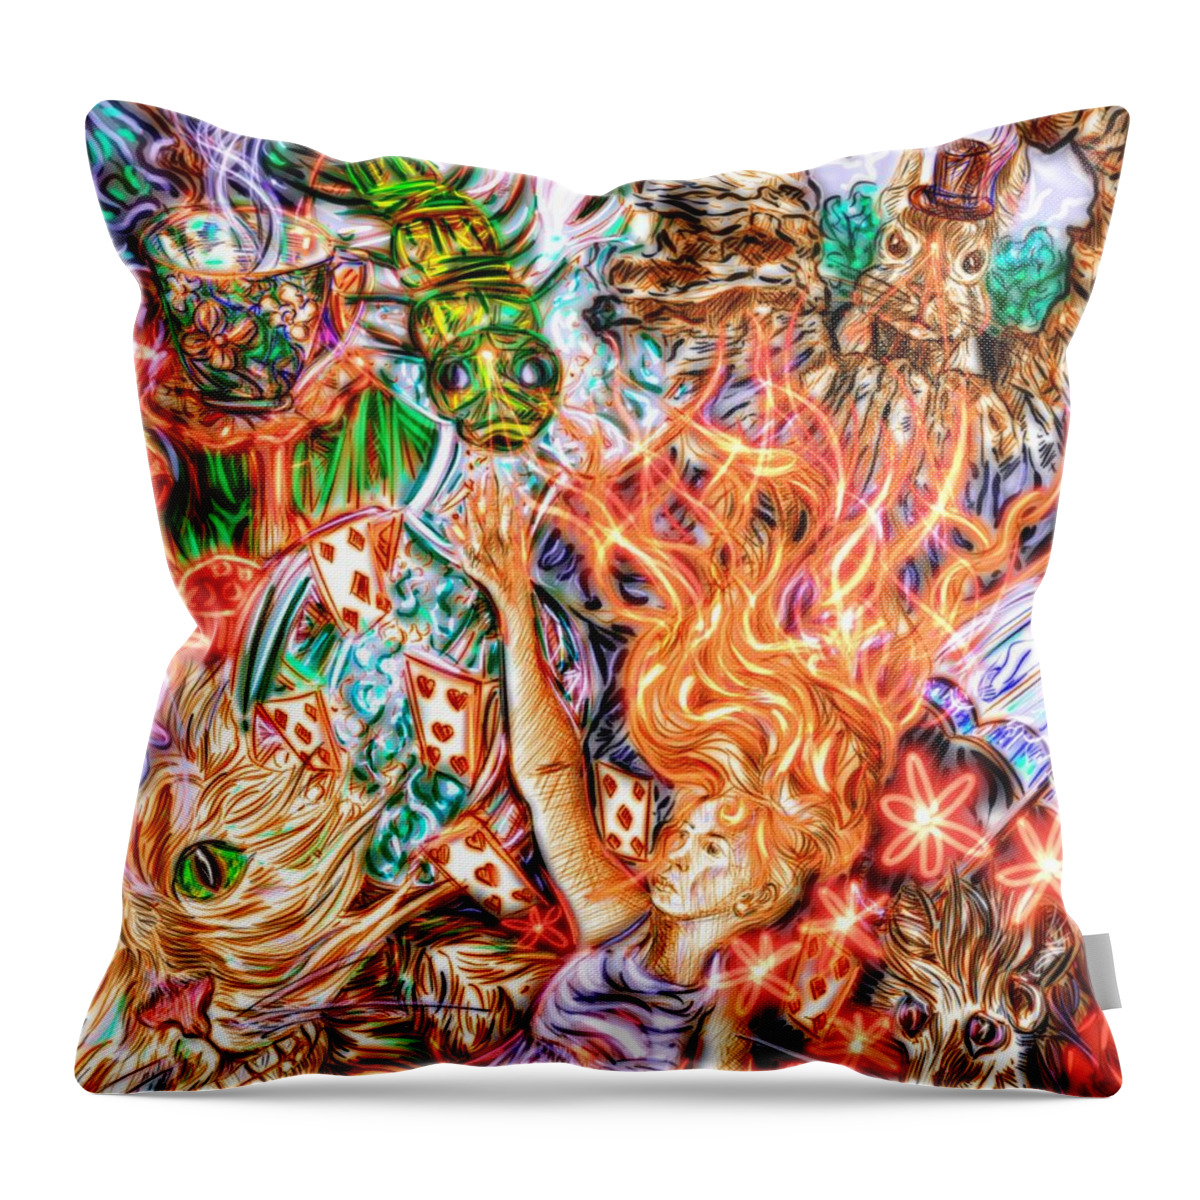 Alice In Wonderland Throw Pillow featuring the digital art Go Ask Alice by Angela Weddle